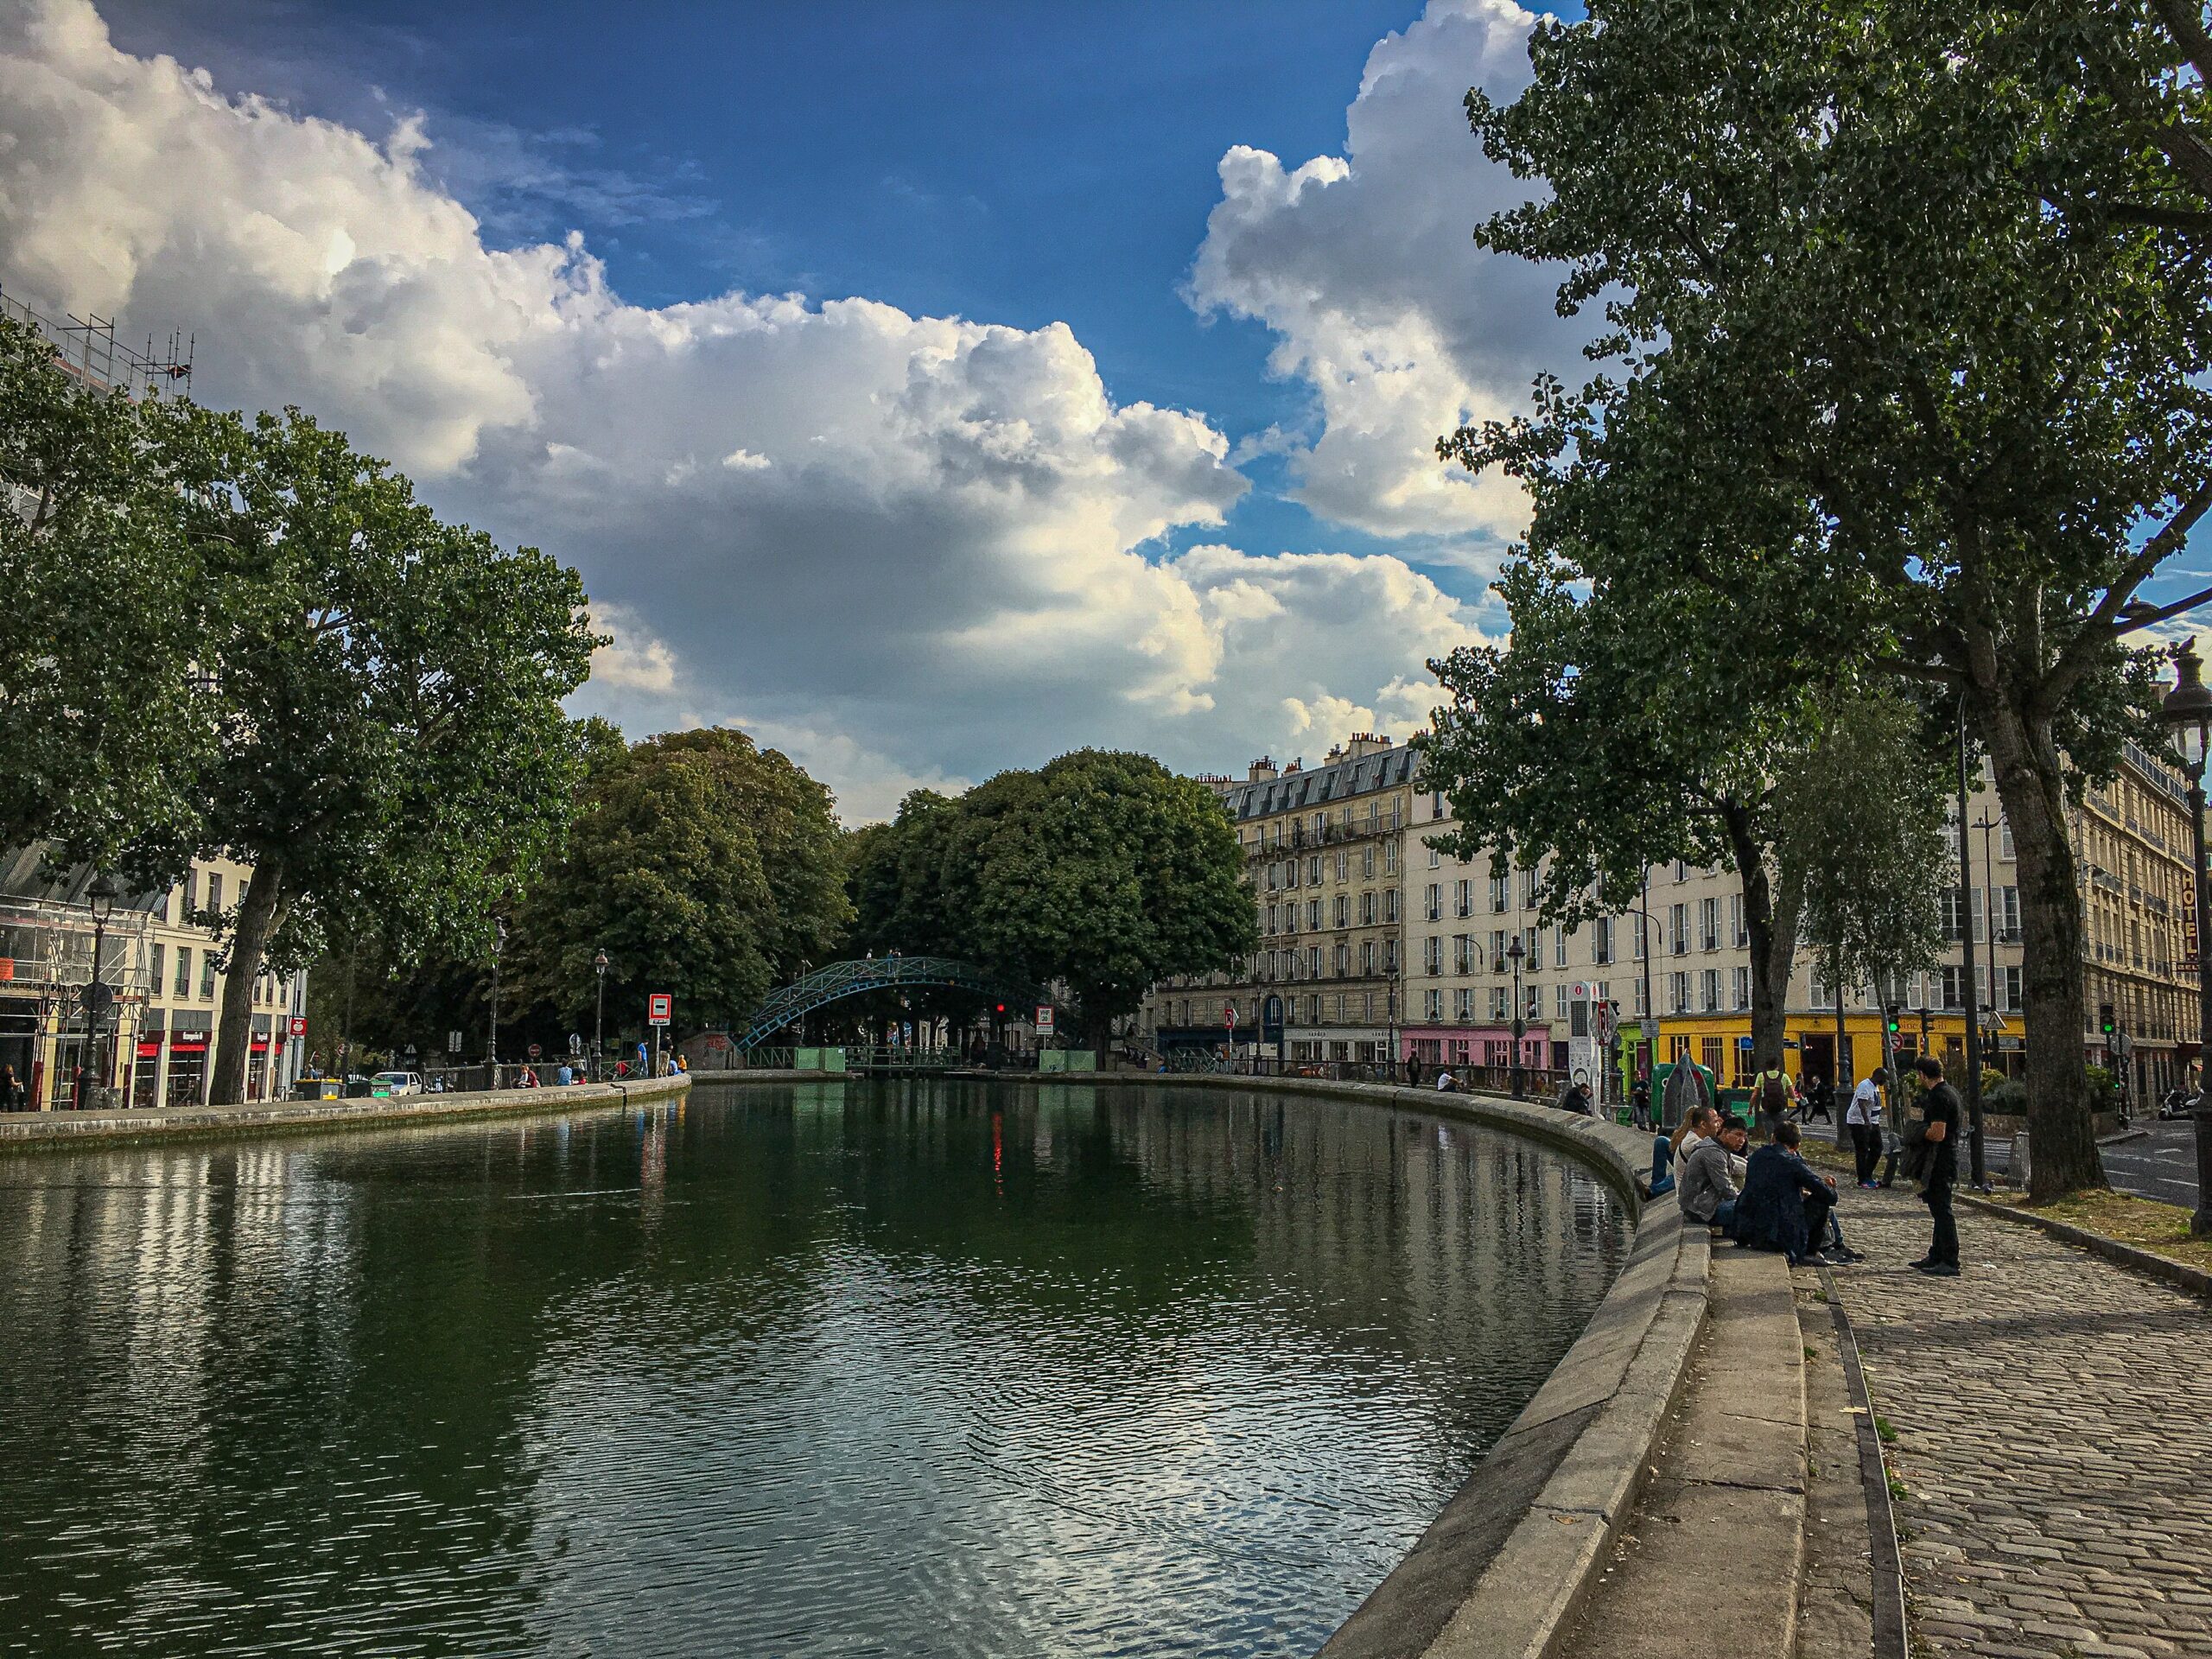 down the Canal Saint Martin in Paris with trees and people sitting along the bank